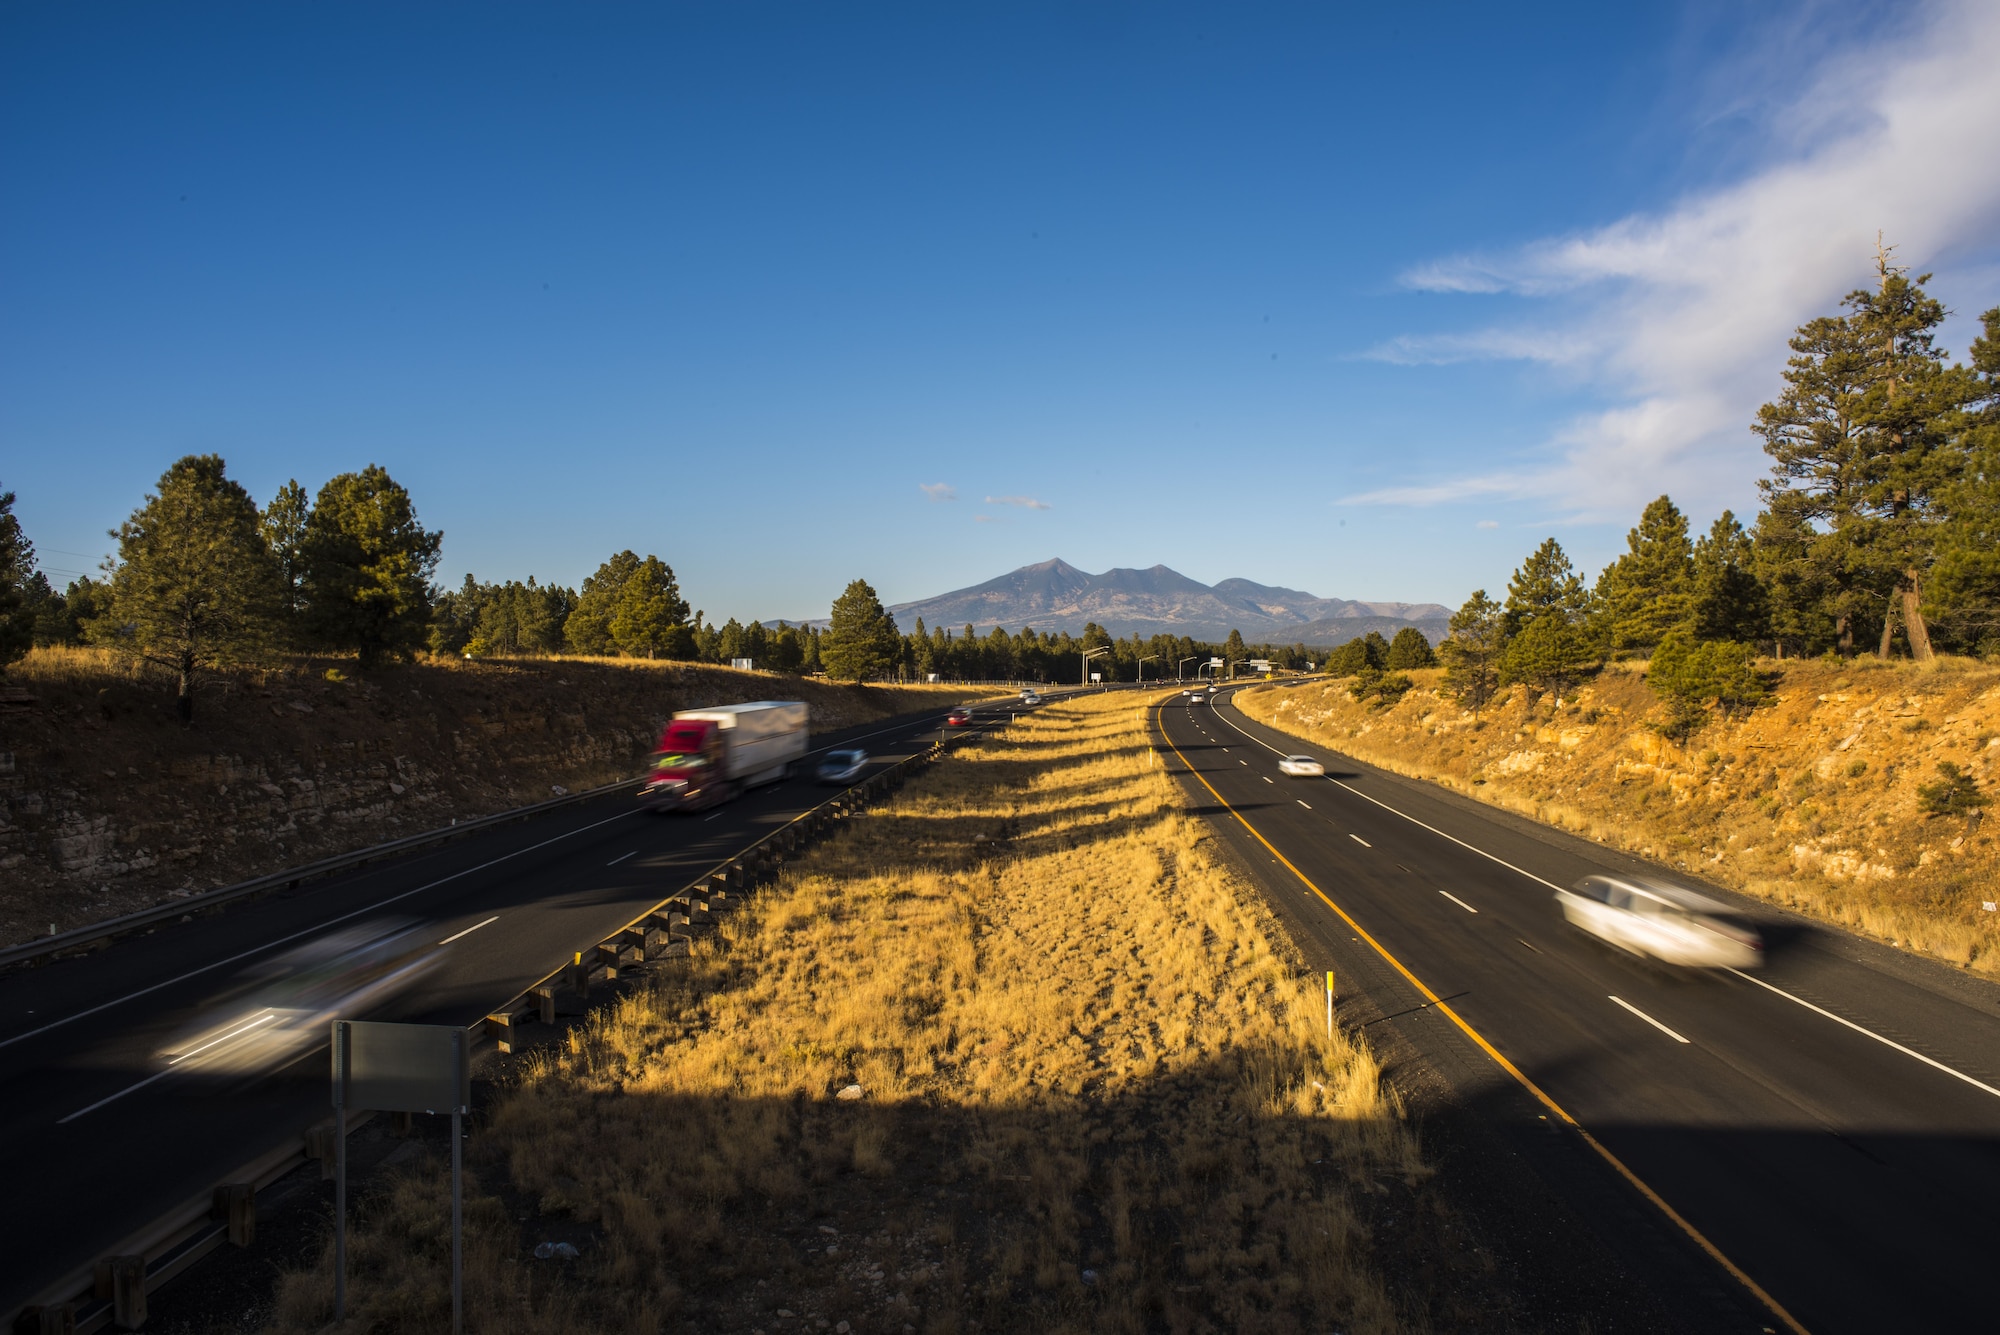 The San Francisco peaks are viewed from Interstate 17 leading towards Fort Tuthill in Flagstaff, Ariz., Dec. 16, 2017. The Fort Tuthill Military Recreation Area comprises approximately 15 acres of cabins, tent grounds, RV sites, yurts, trails, and a hotel, all within the greater Fort Tuthill County Park. (U.S. Air Force photo/Airman 1st Class Caleb Worpel)